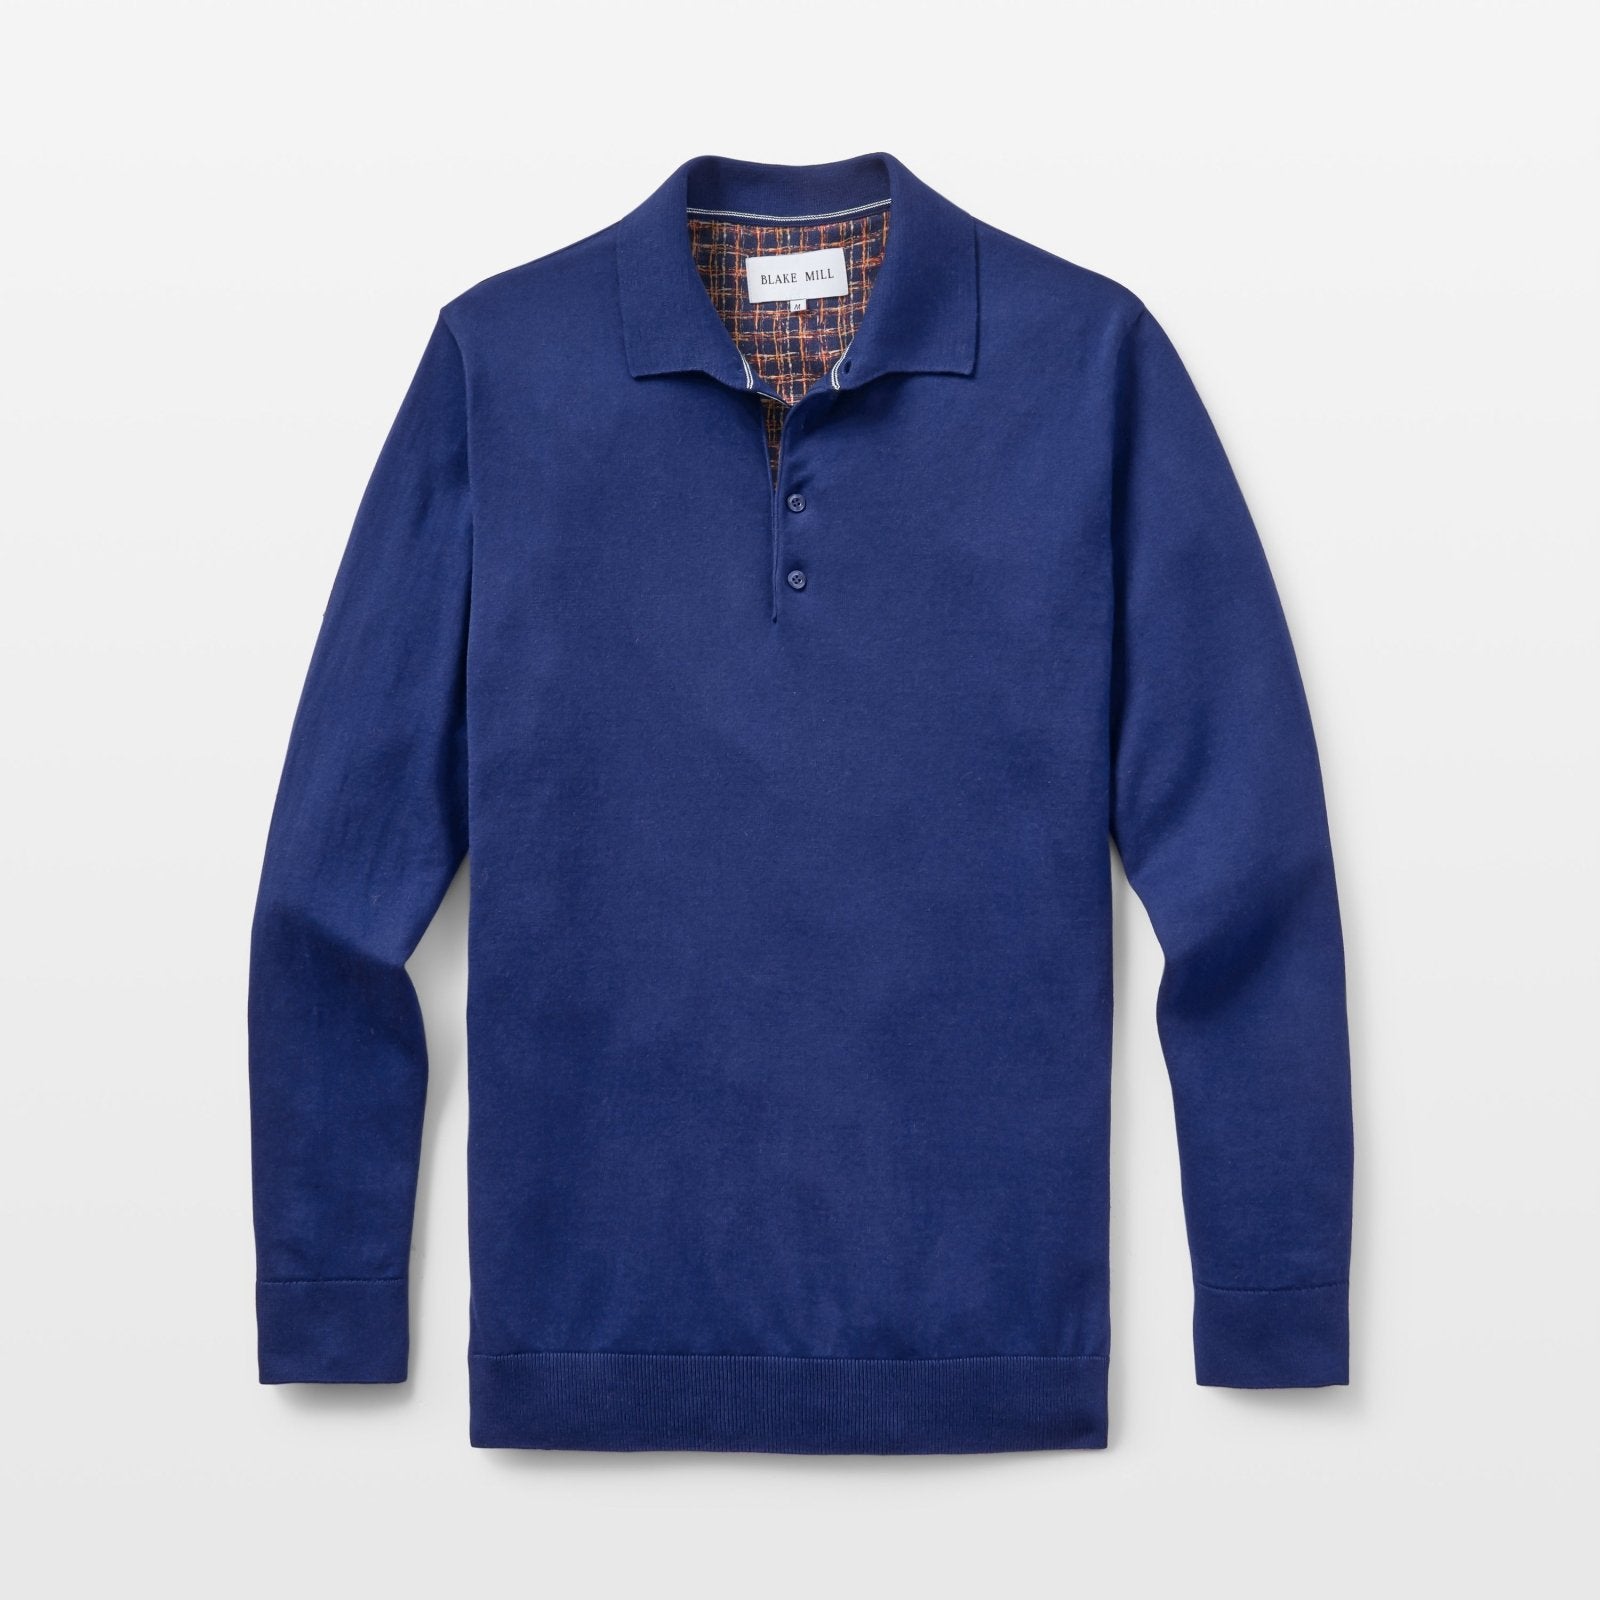 Navy Knit Polo with Check Accents - Blake Mill